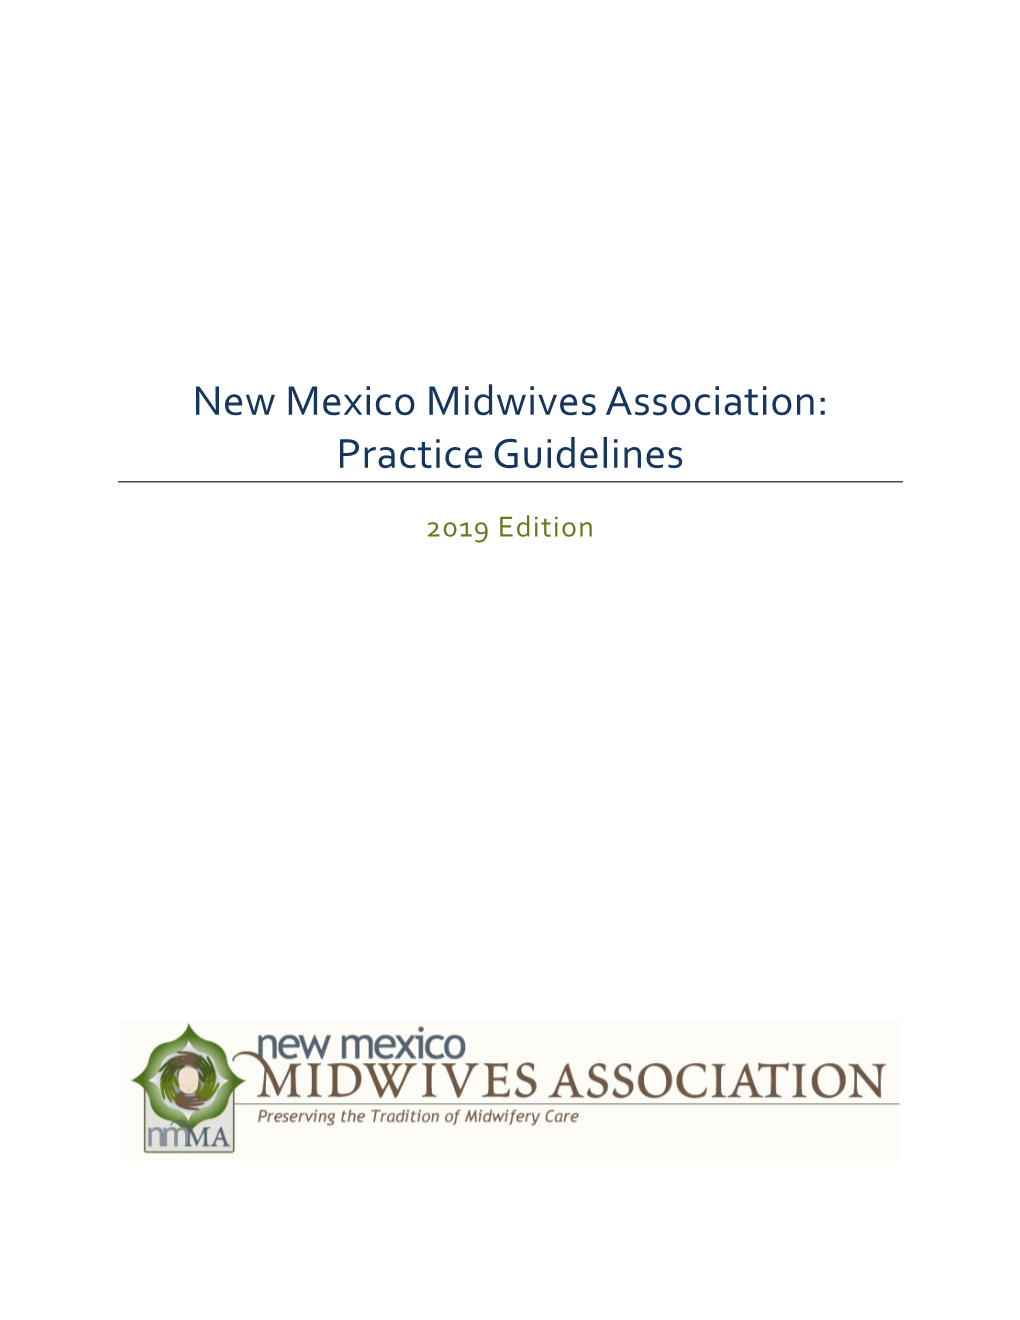 New Mexico Midwives Association: Practice Guidelines